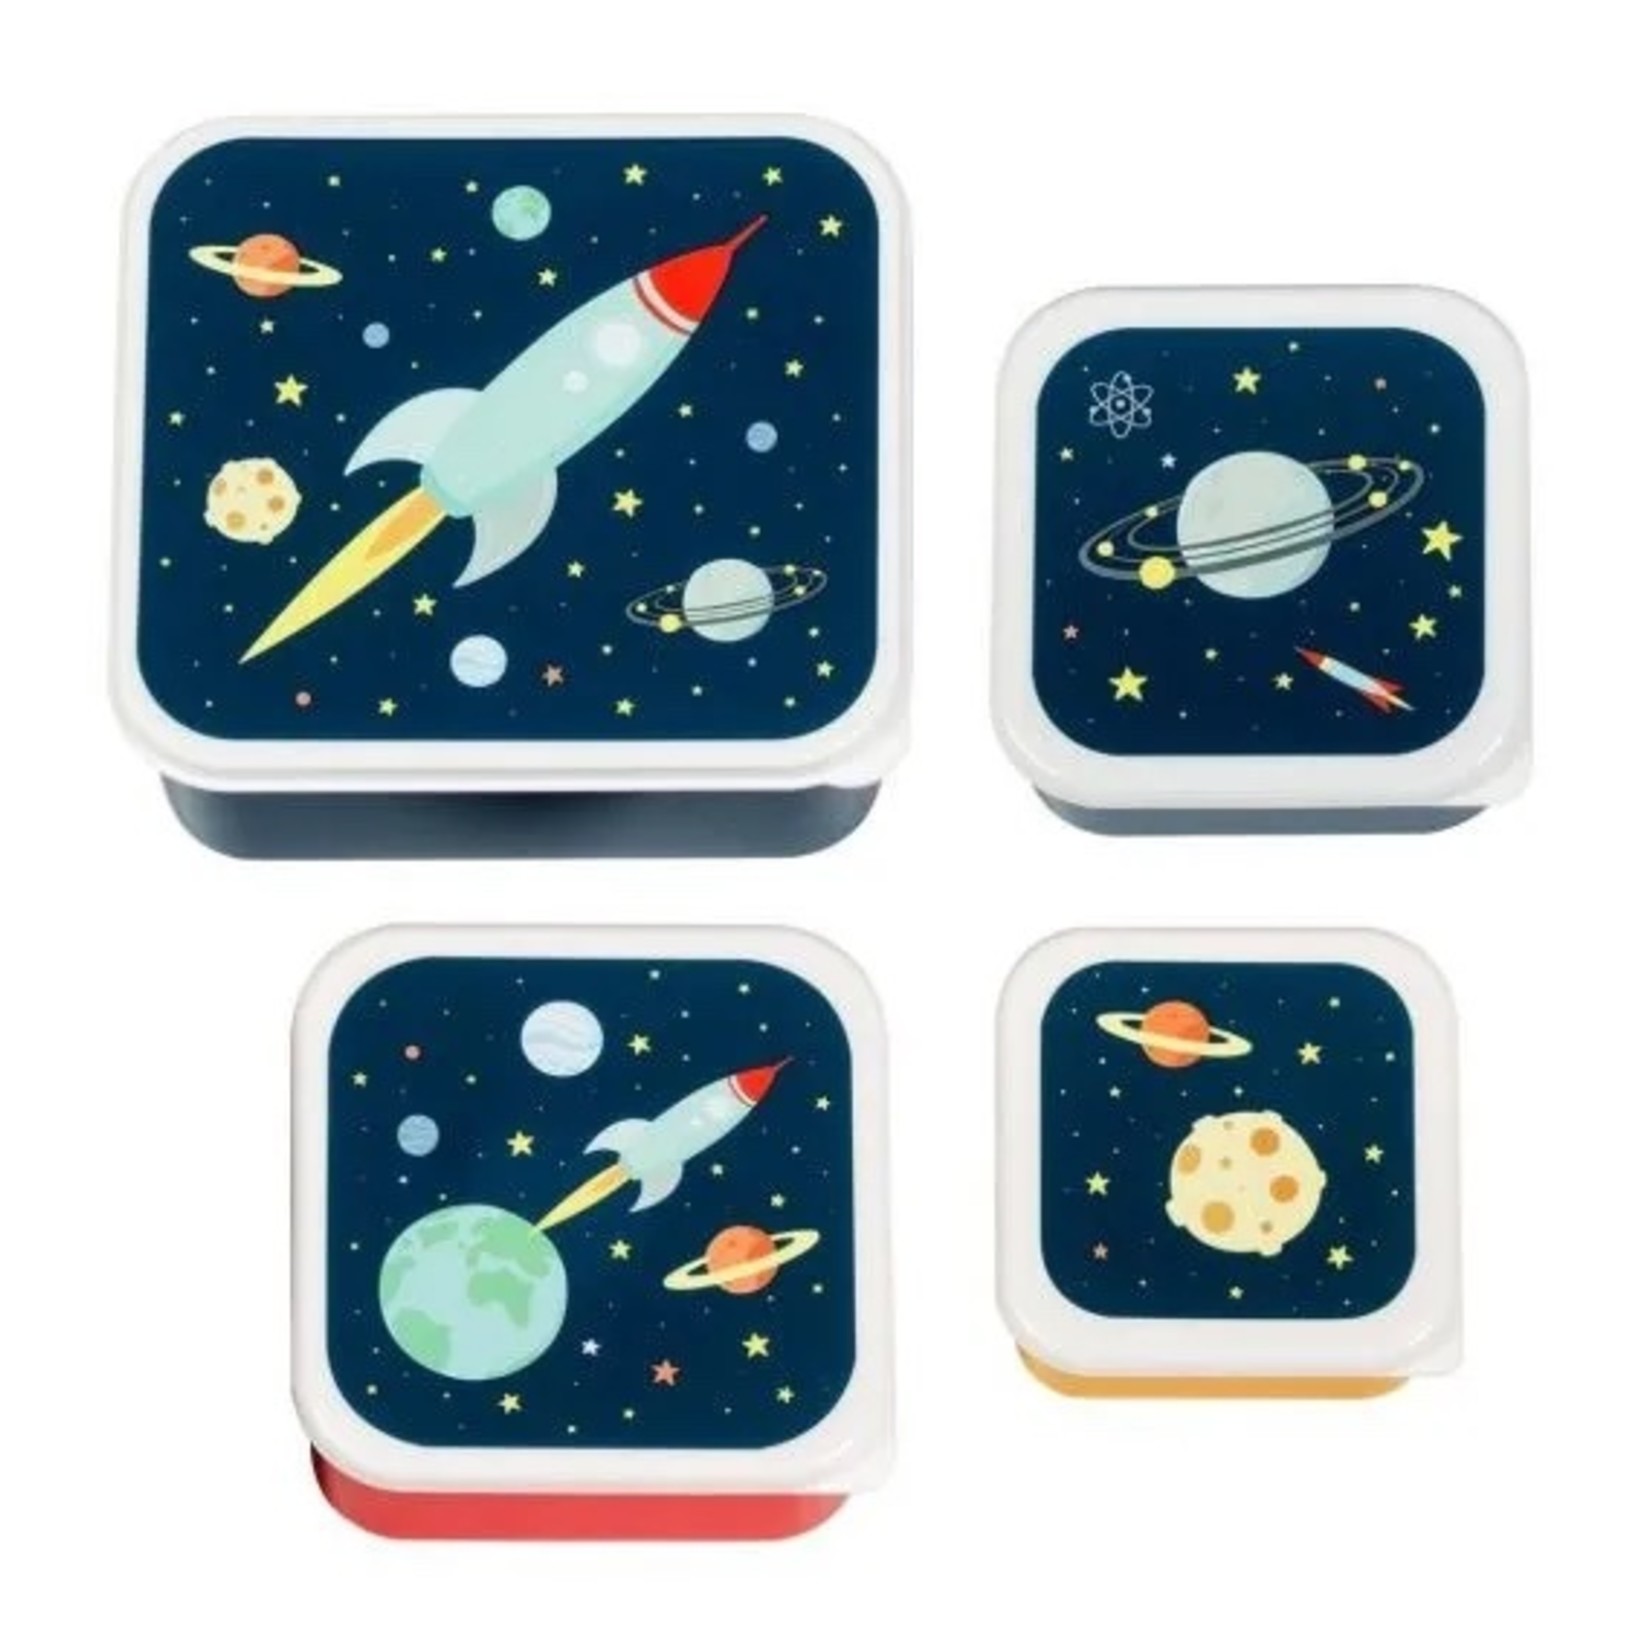 A LITTLE LOVELY COMPANY LUNCH & SNACK BOX SET: SPACE